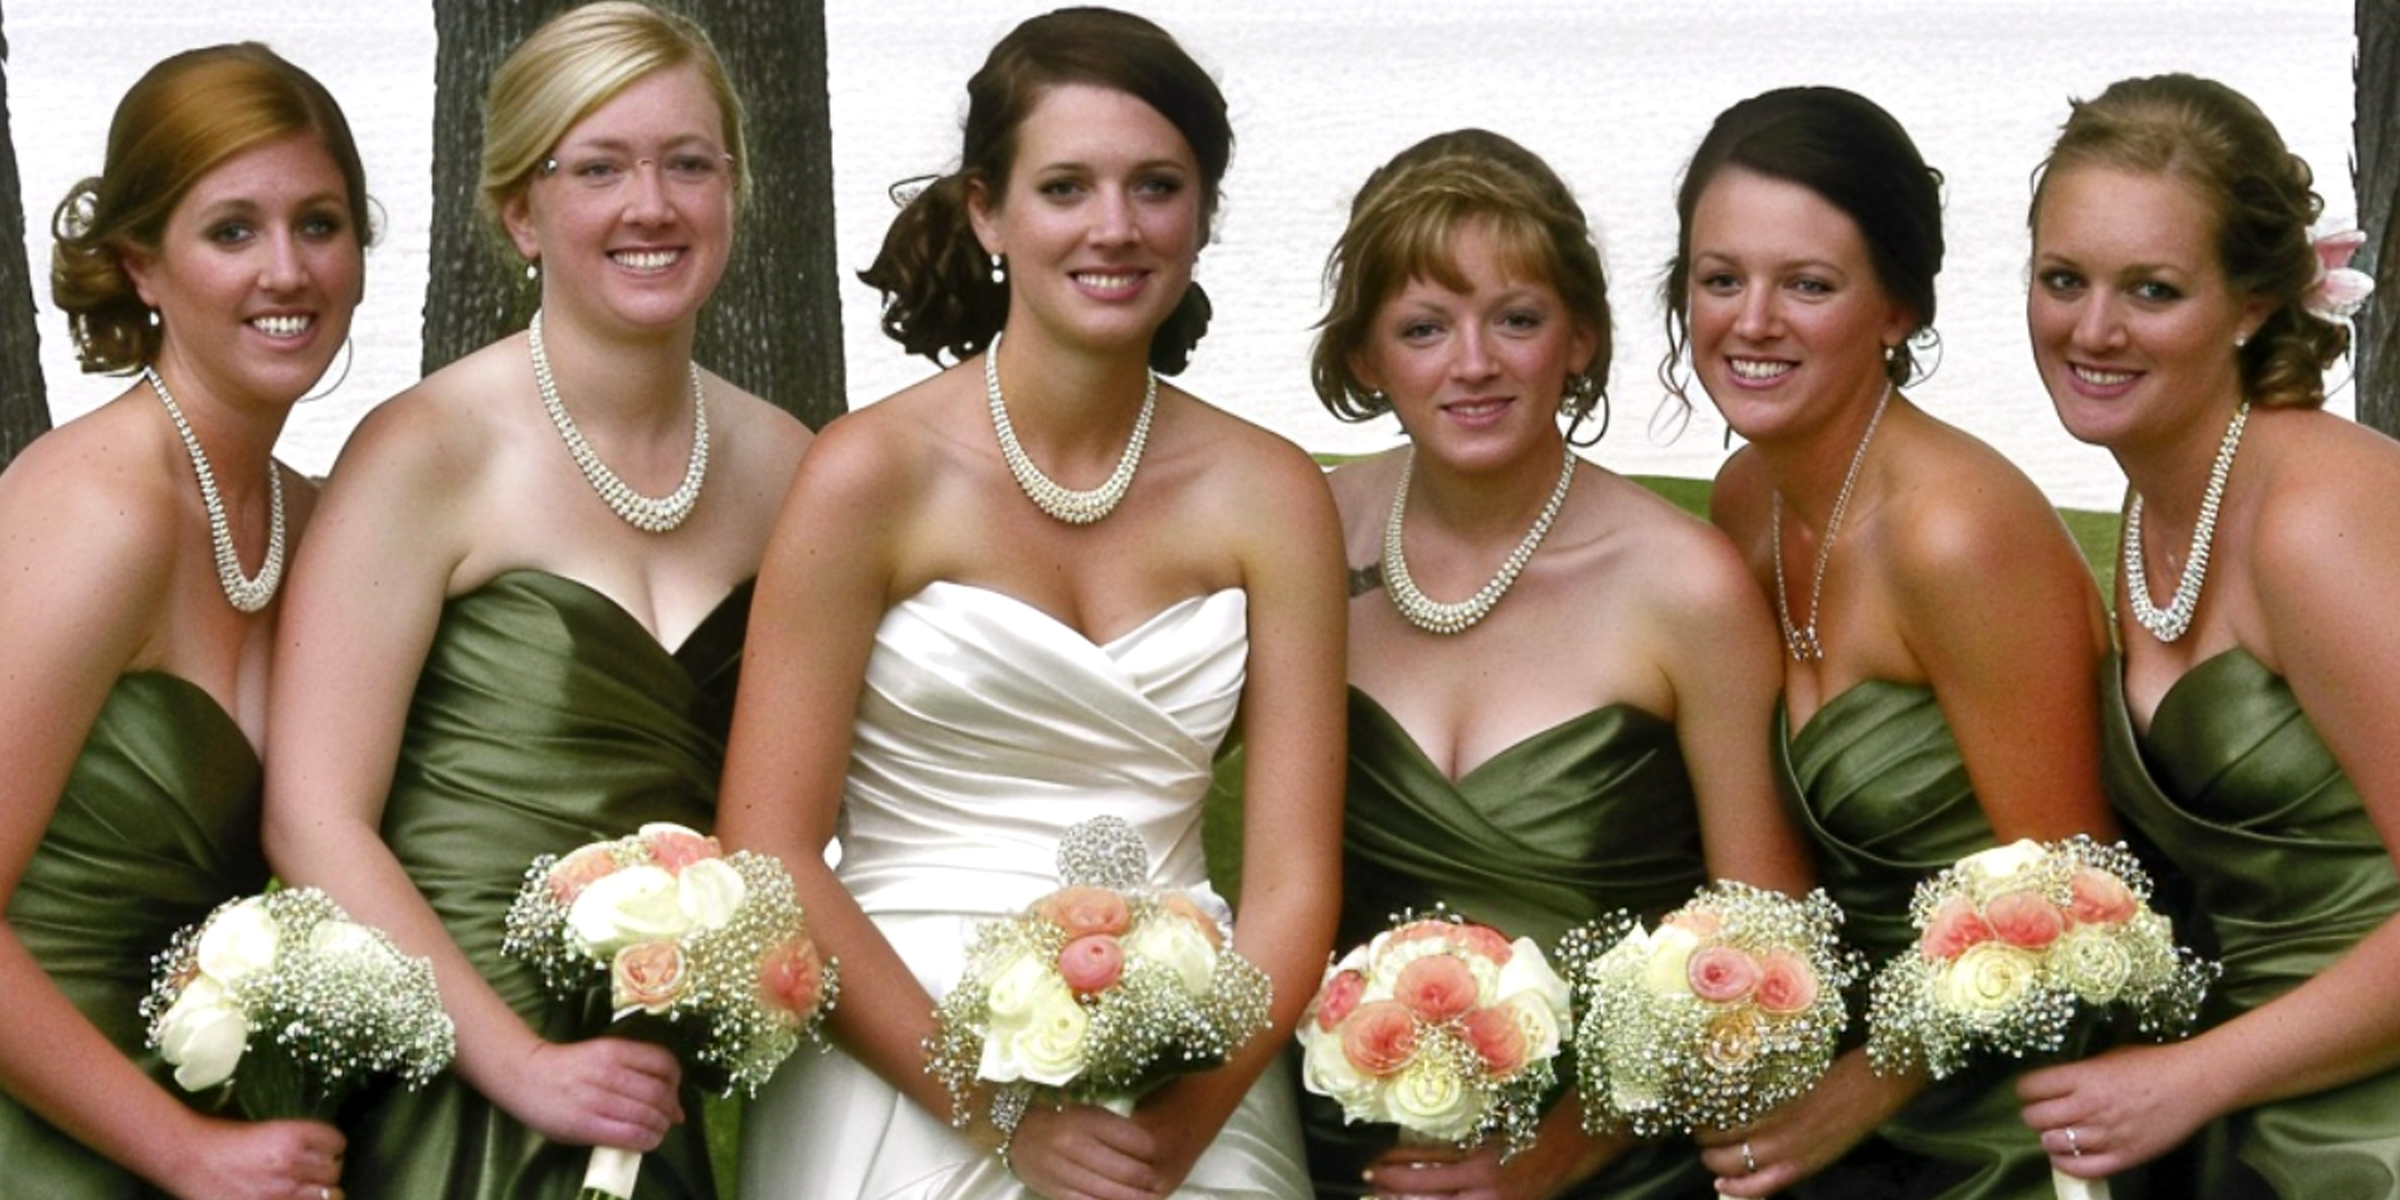 A bride with her bridesmaids | Source: Amomama